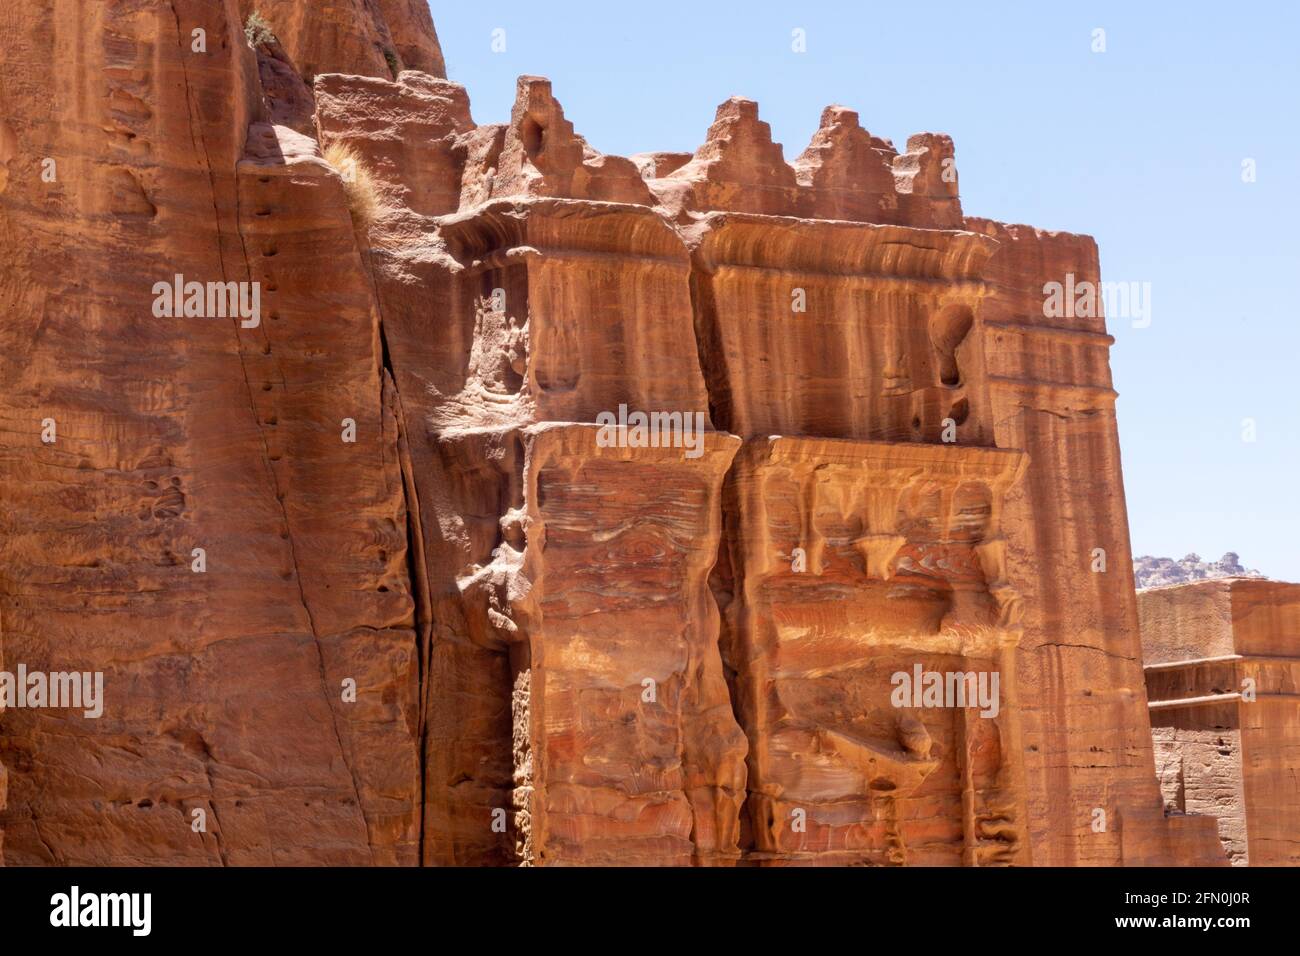 Hegra Tomb BD 70 with sets of five steps, mouldings, attic above classical entablature, supported by pilasters, Street of Facades, Petra, Jordan Stock Photo